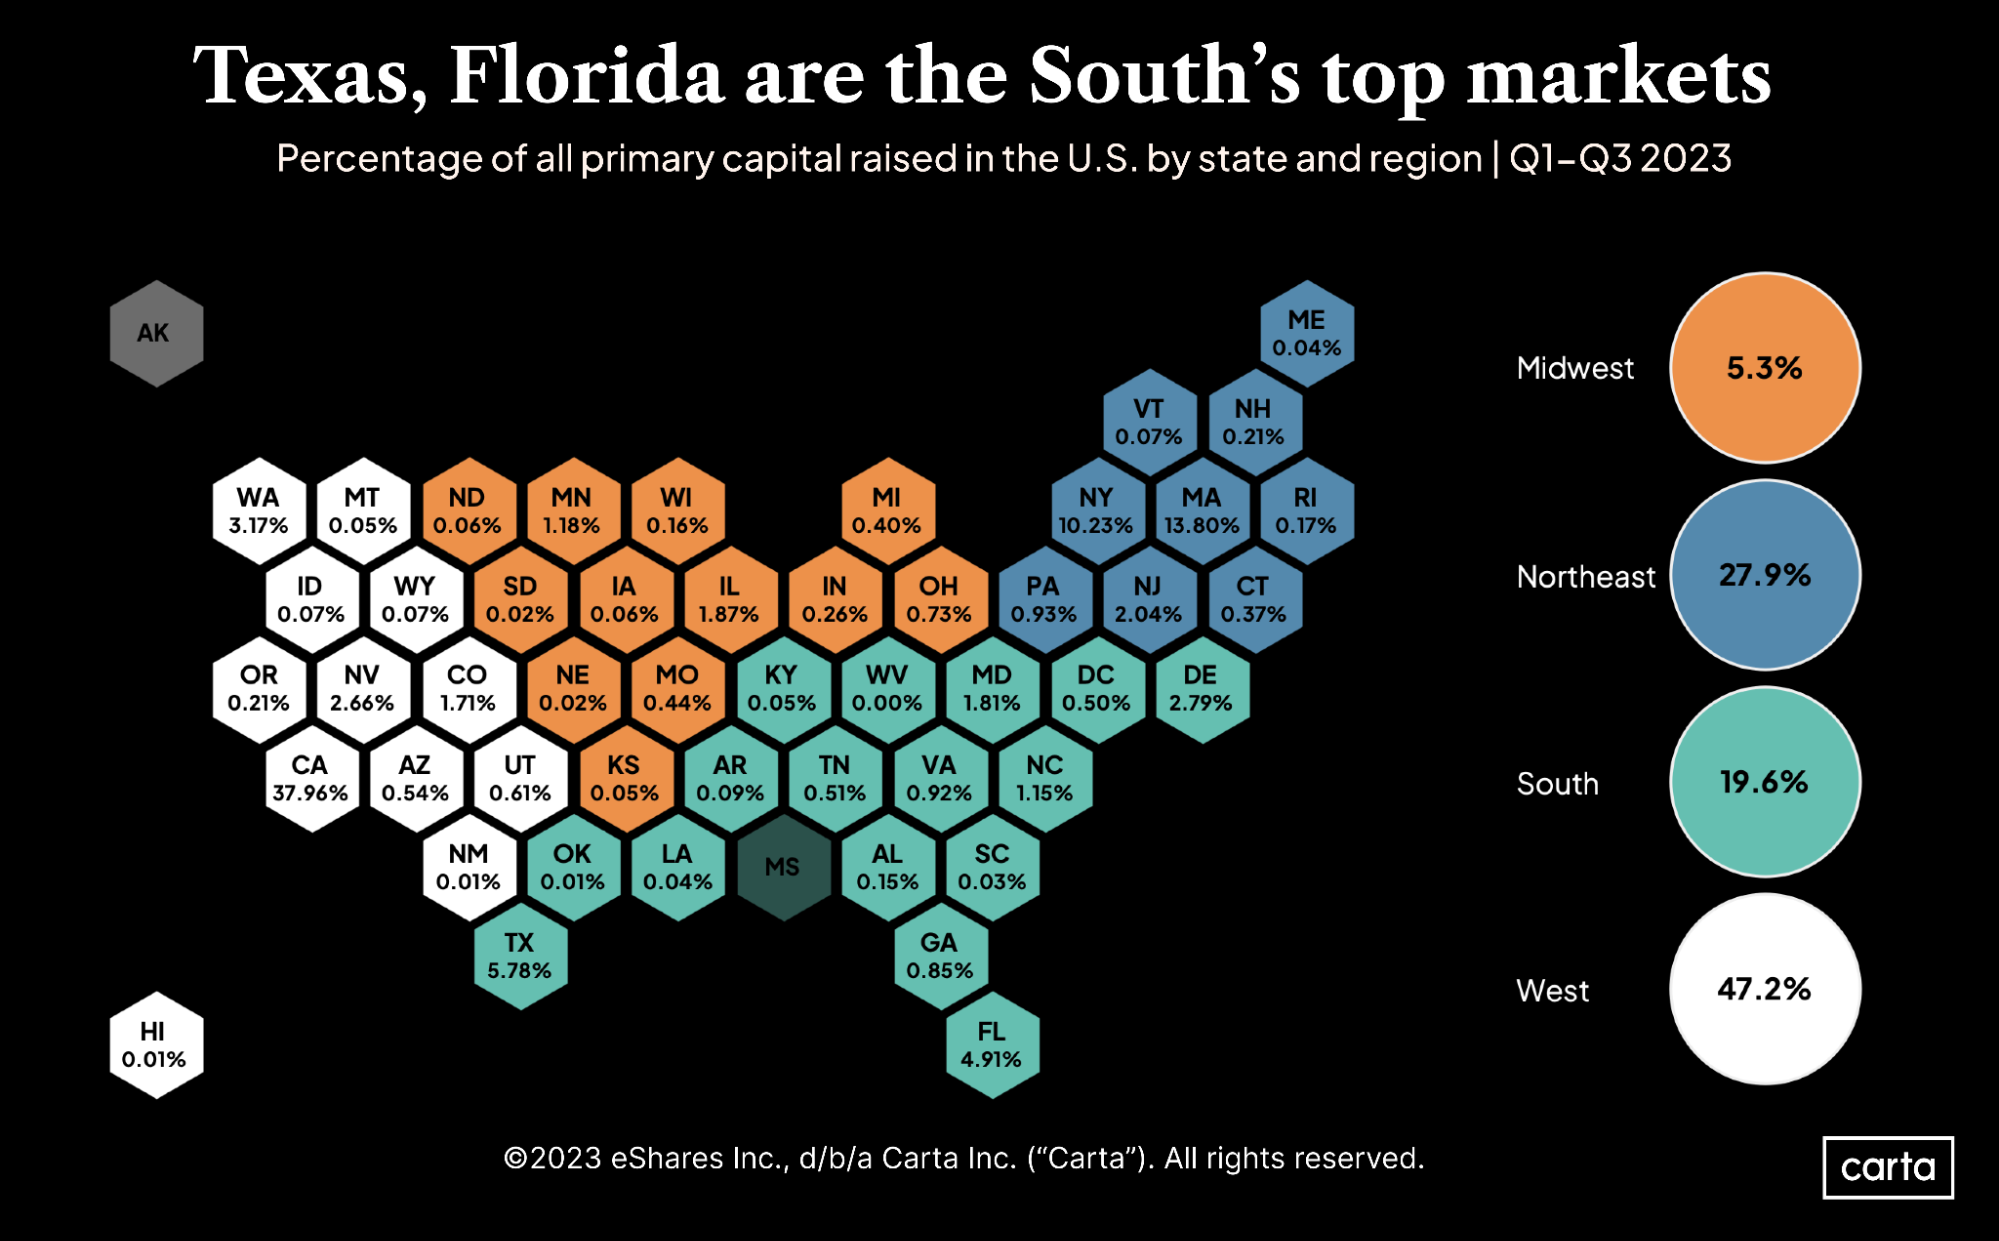 Texas, Florida are the South's top markets